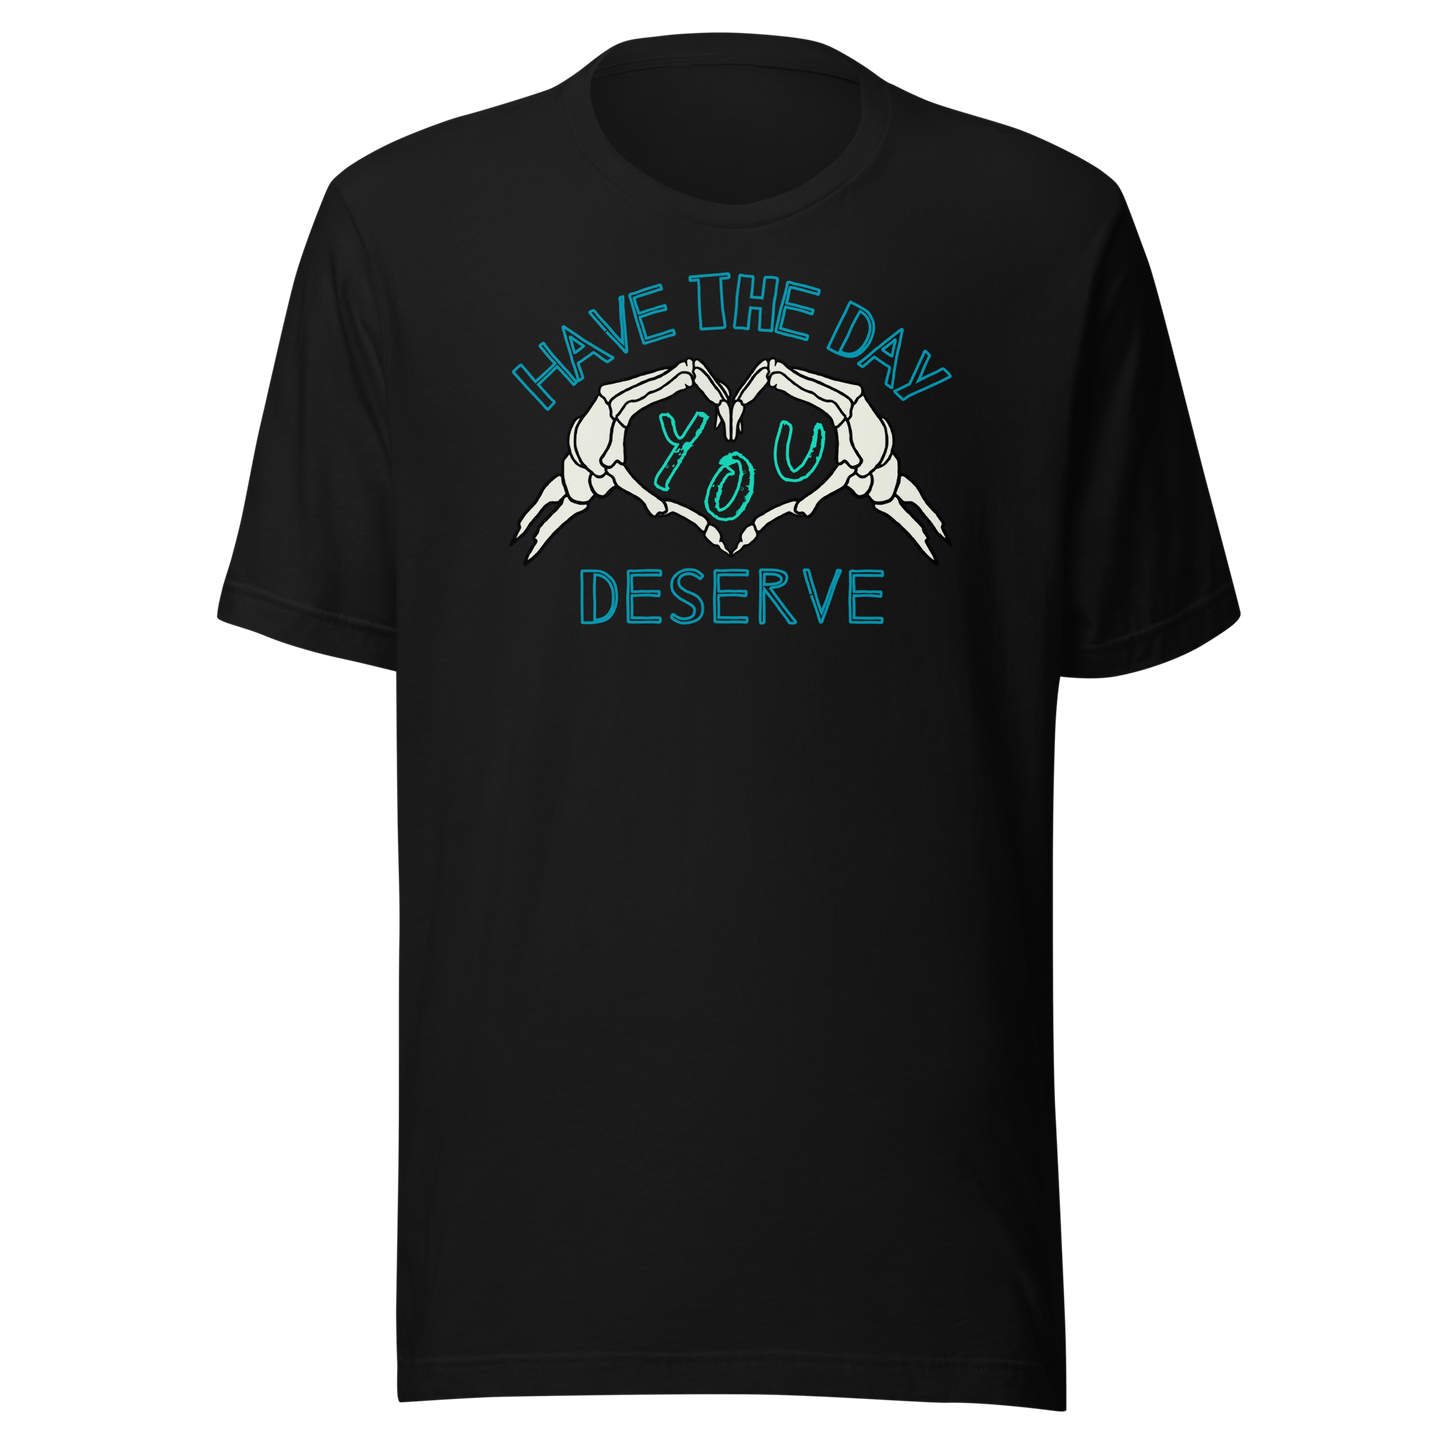 Have The Day You Deserve Unisex T-Shirt